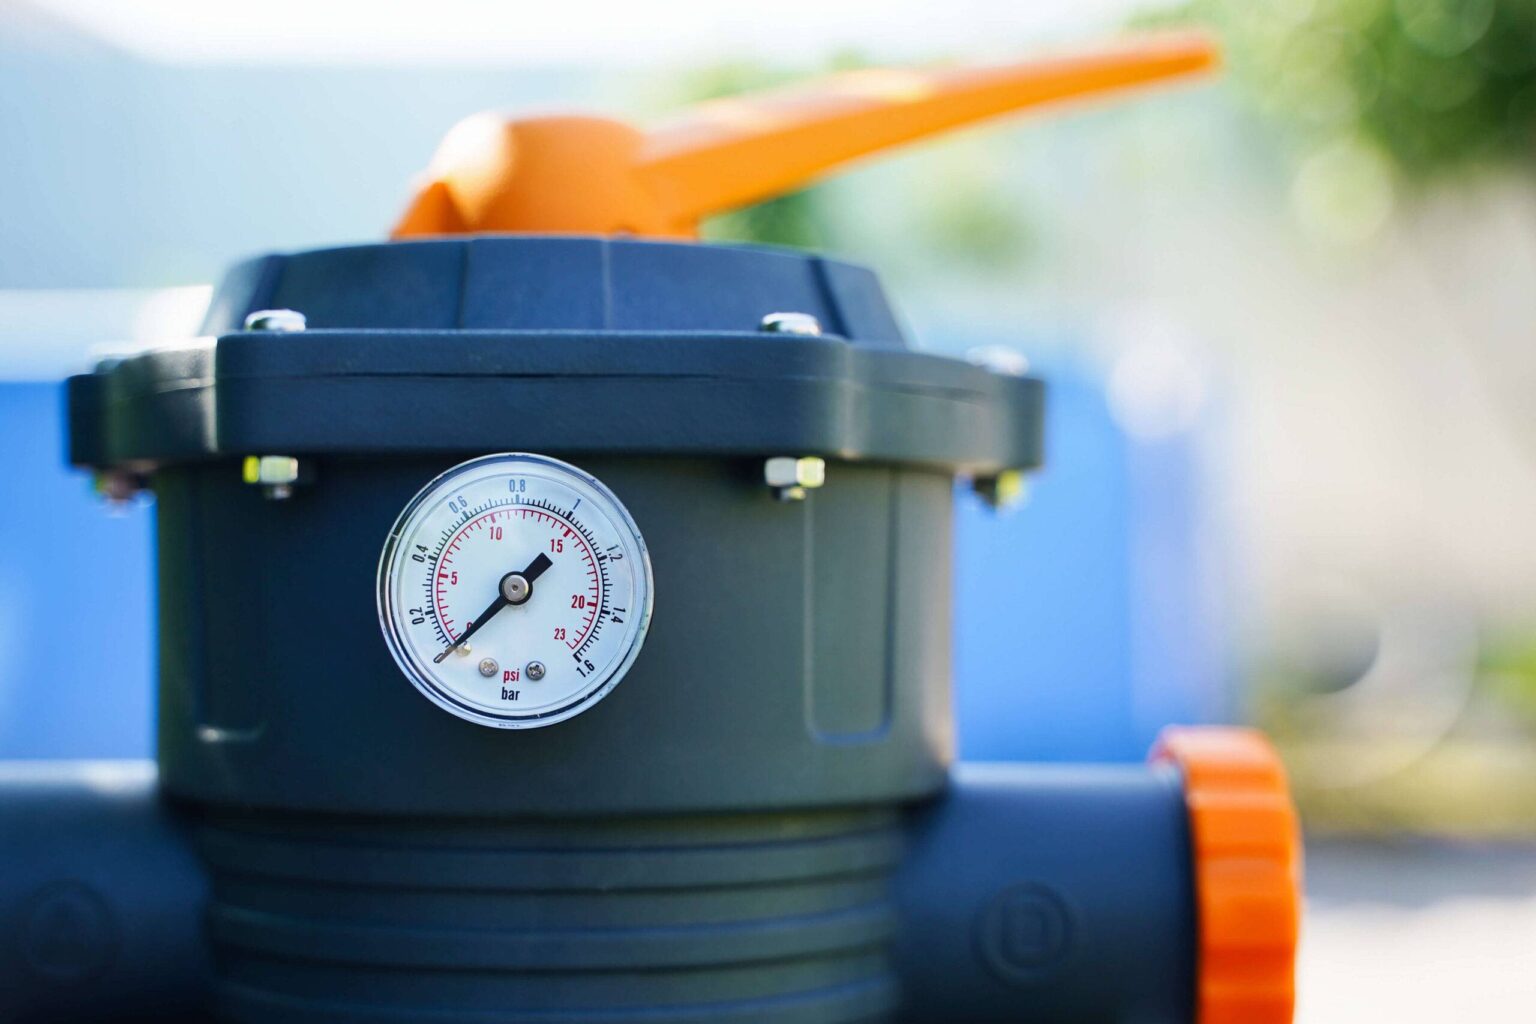 Heat Pump vs. Gas Heater. Which Is Better for Your Pool